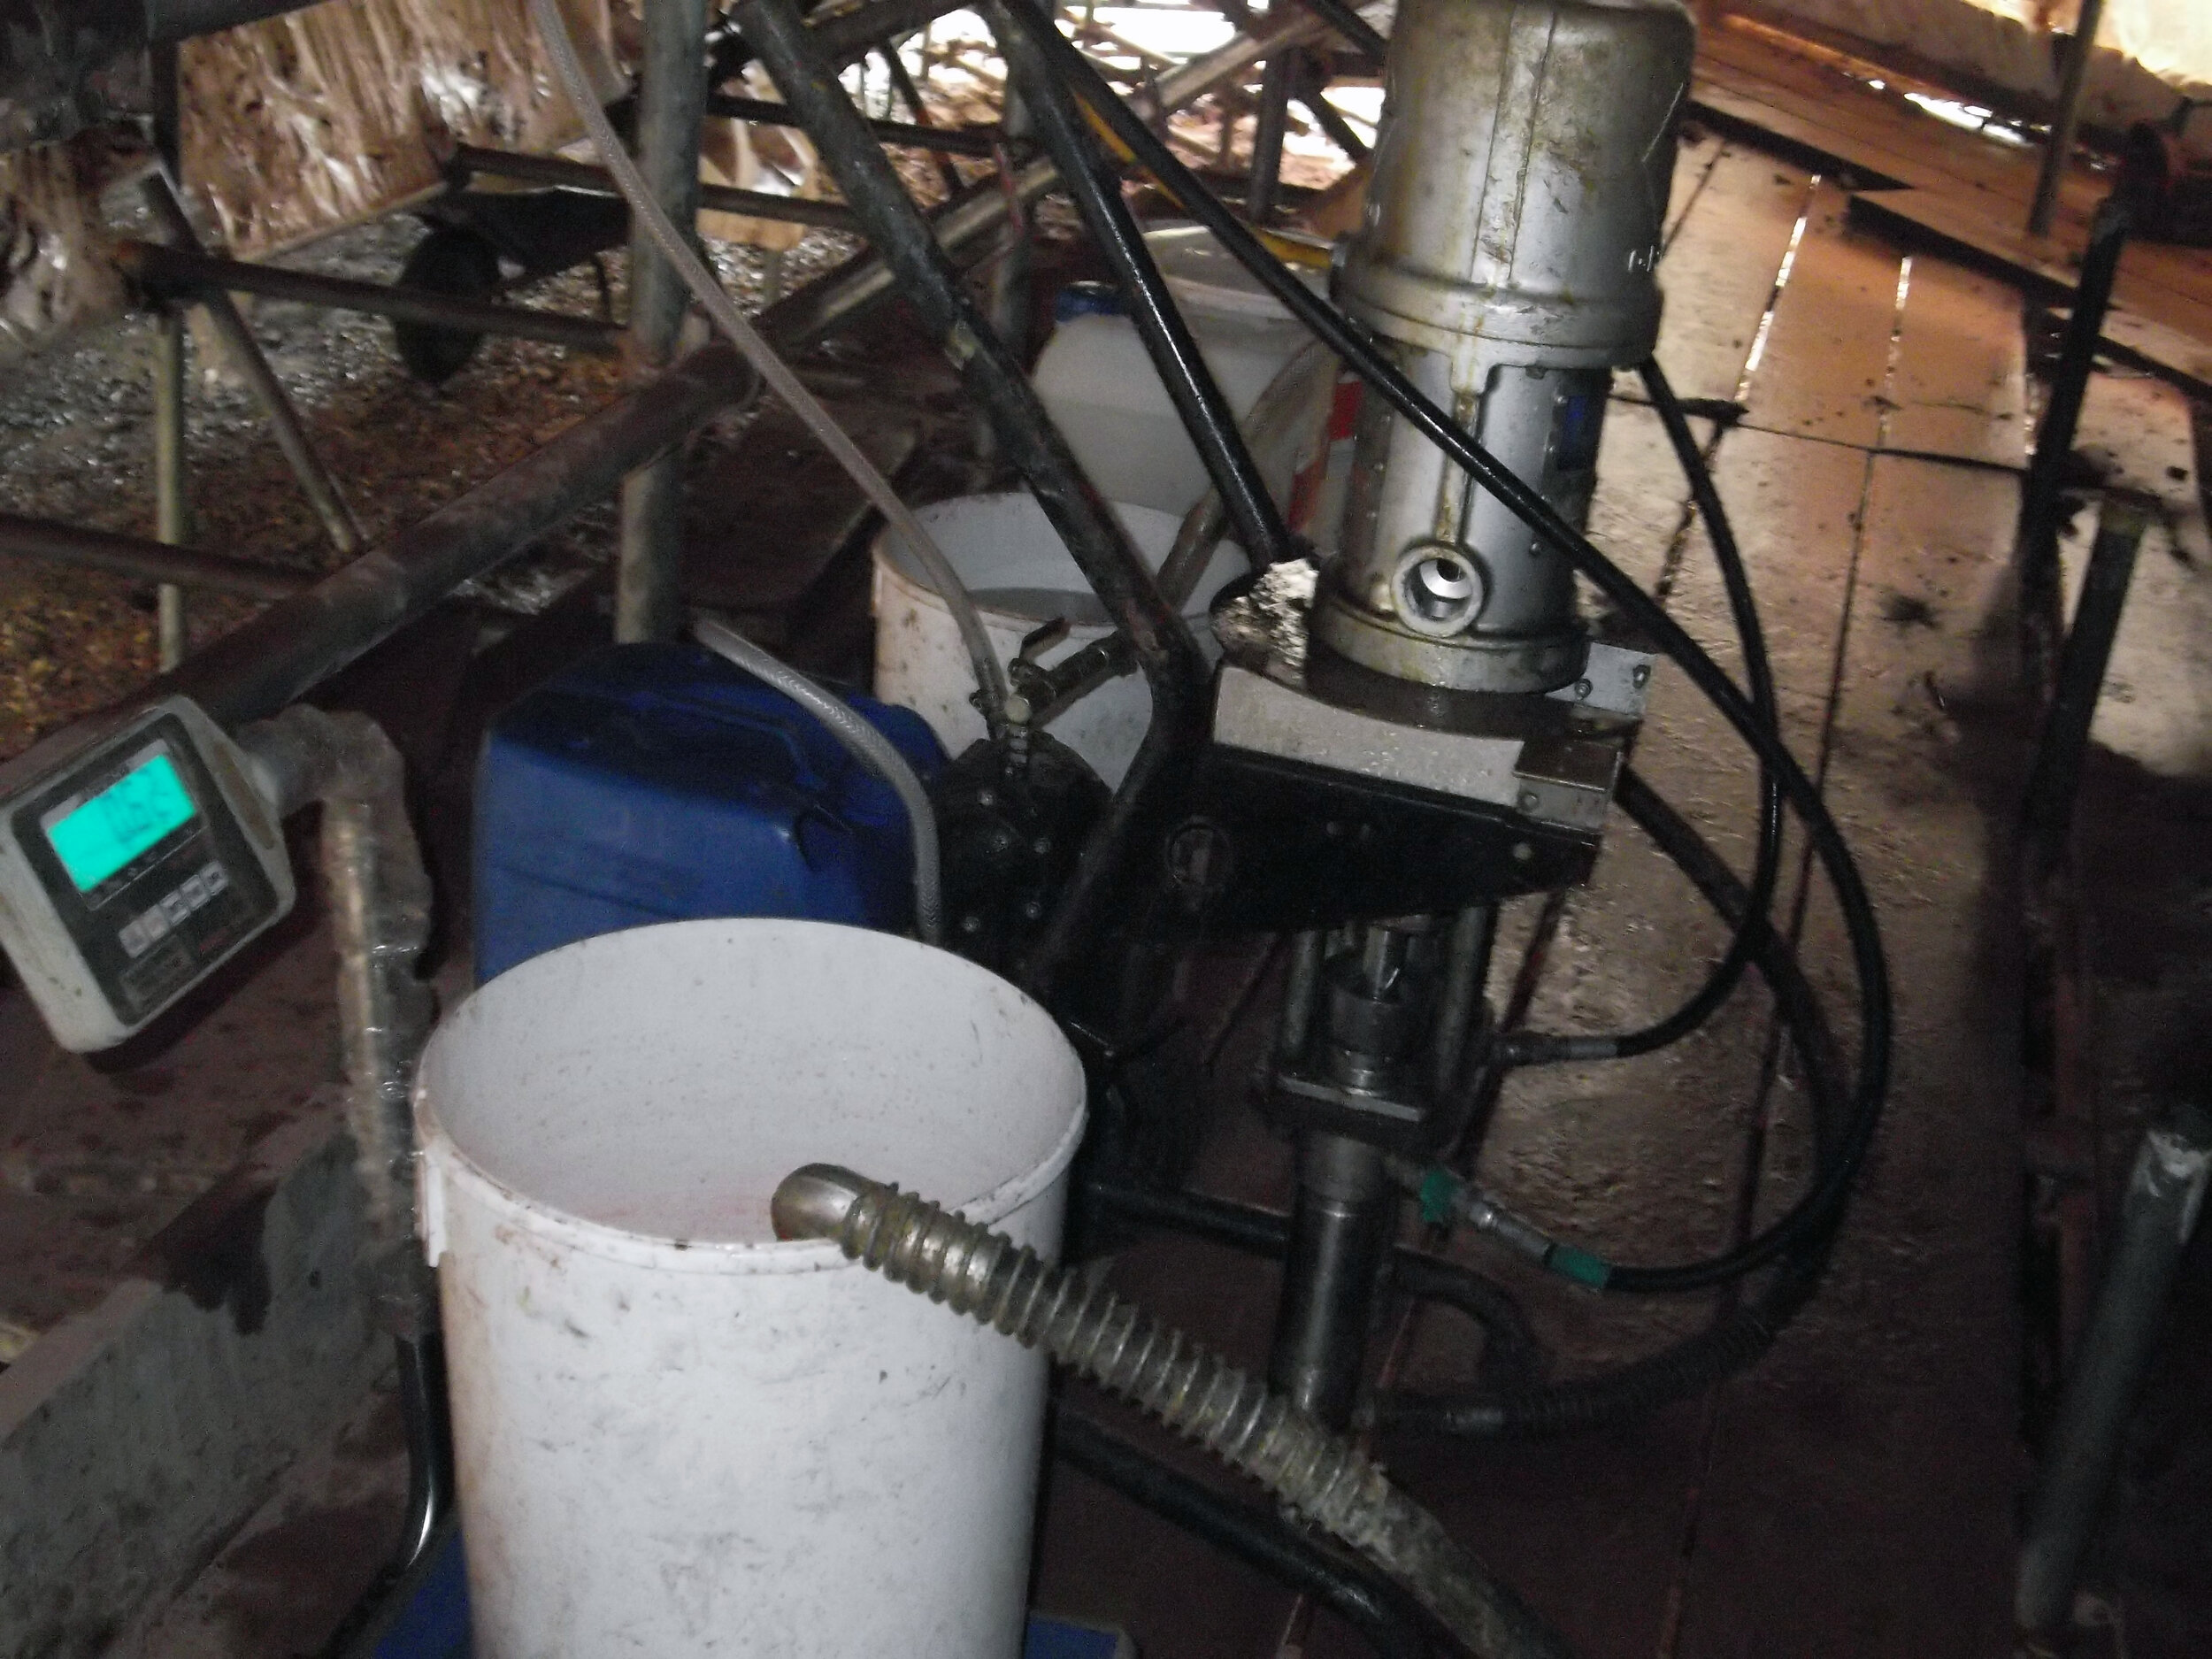 Twin-piston pump set up with scales to measure quantities